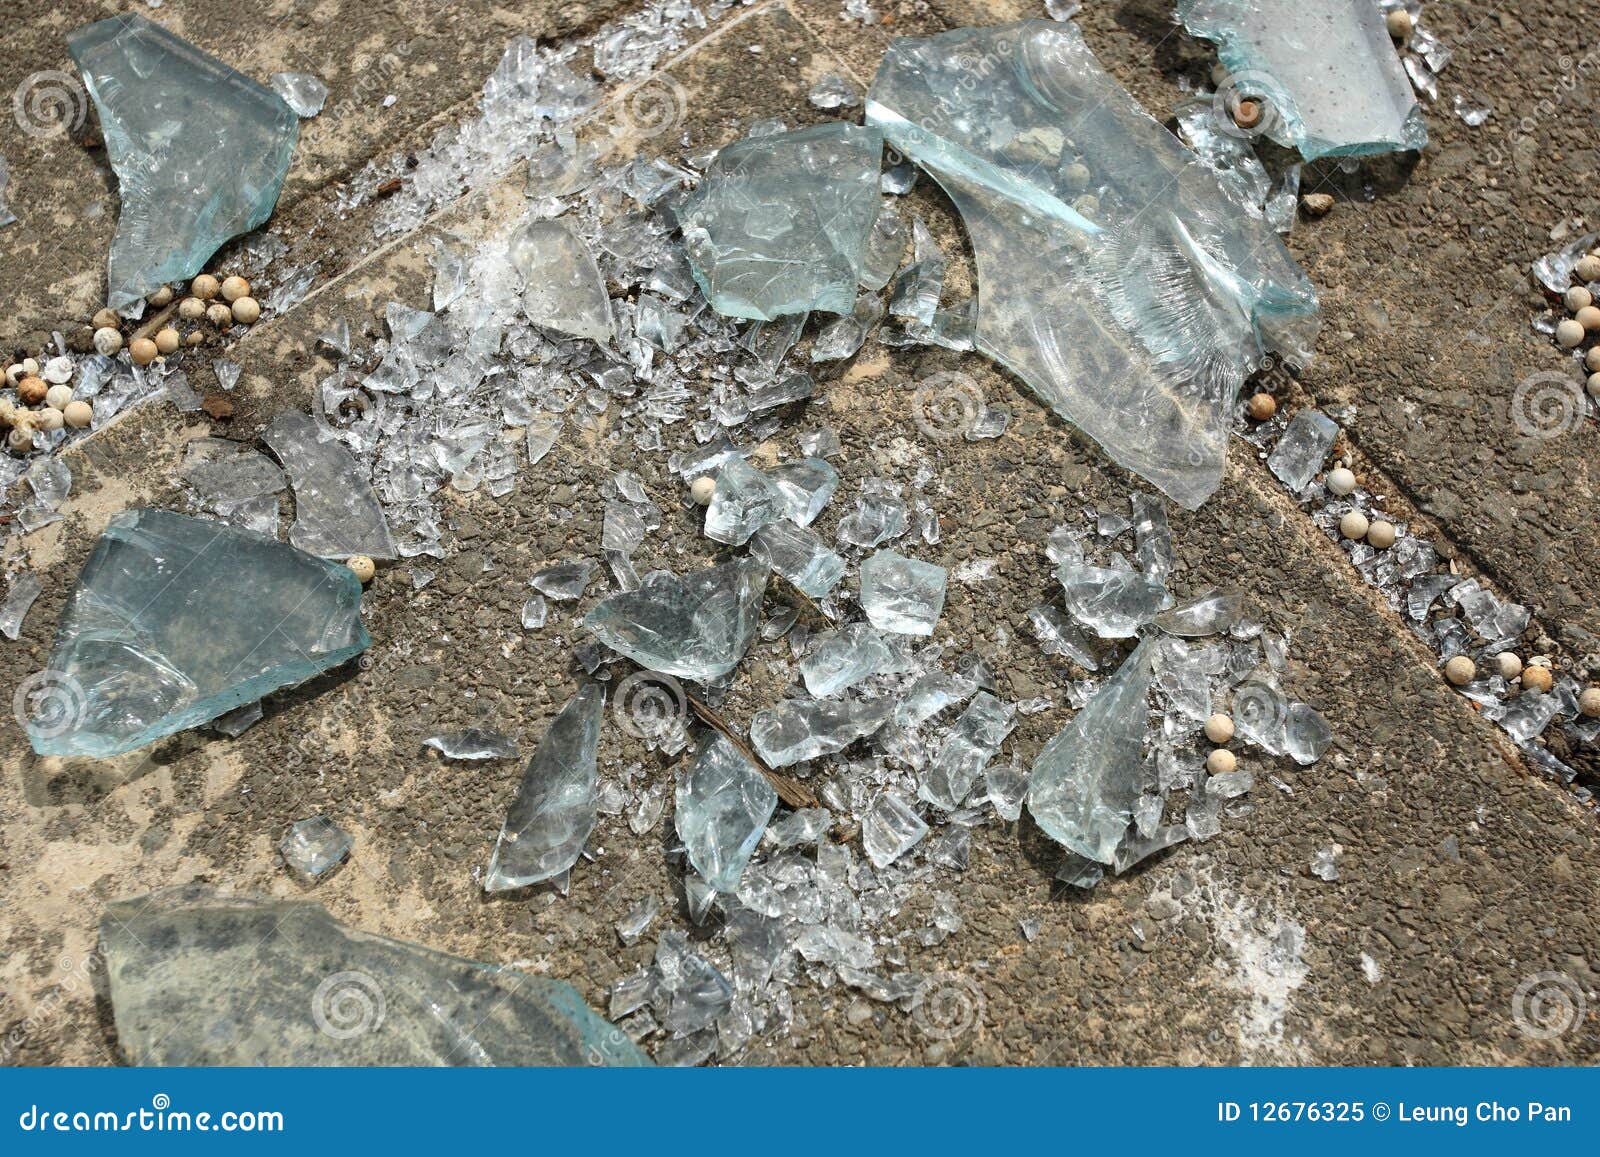 34,521 Broken Glass Pieces Royalty-Free Images, Stock Photos